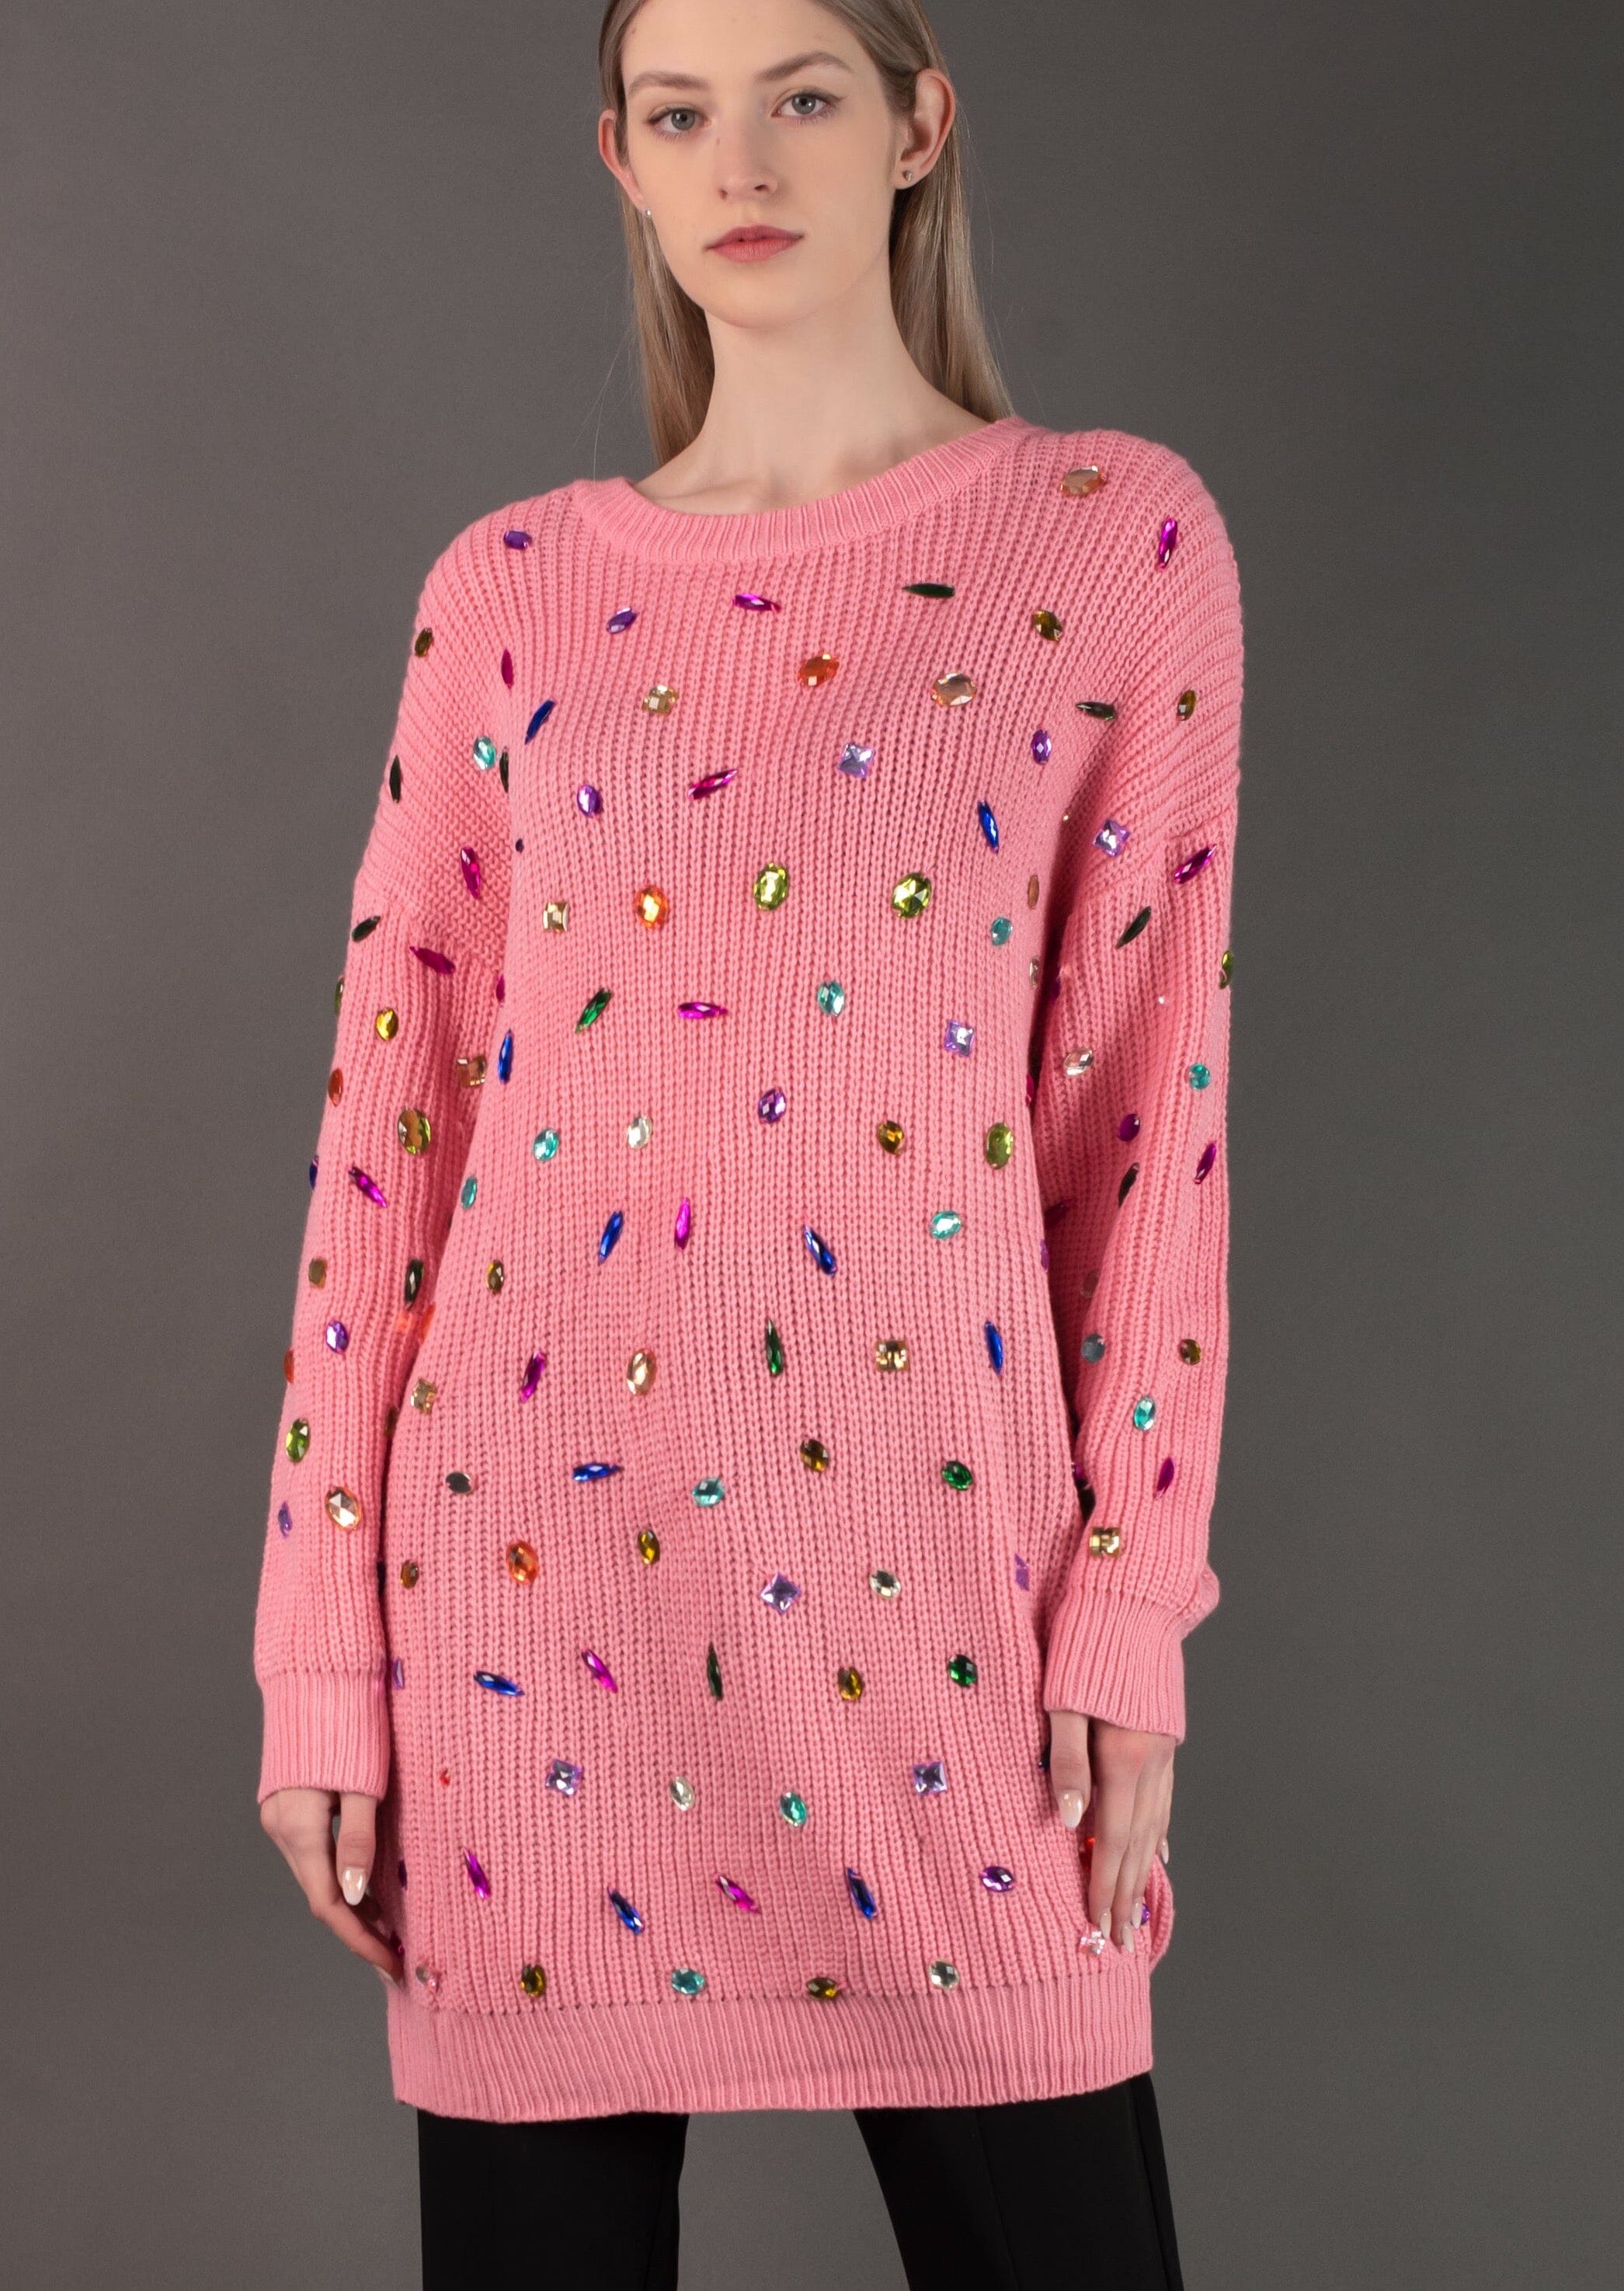 Bedazzled Sweater Tunic Sweaters Kate Hewko Pink S 